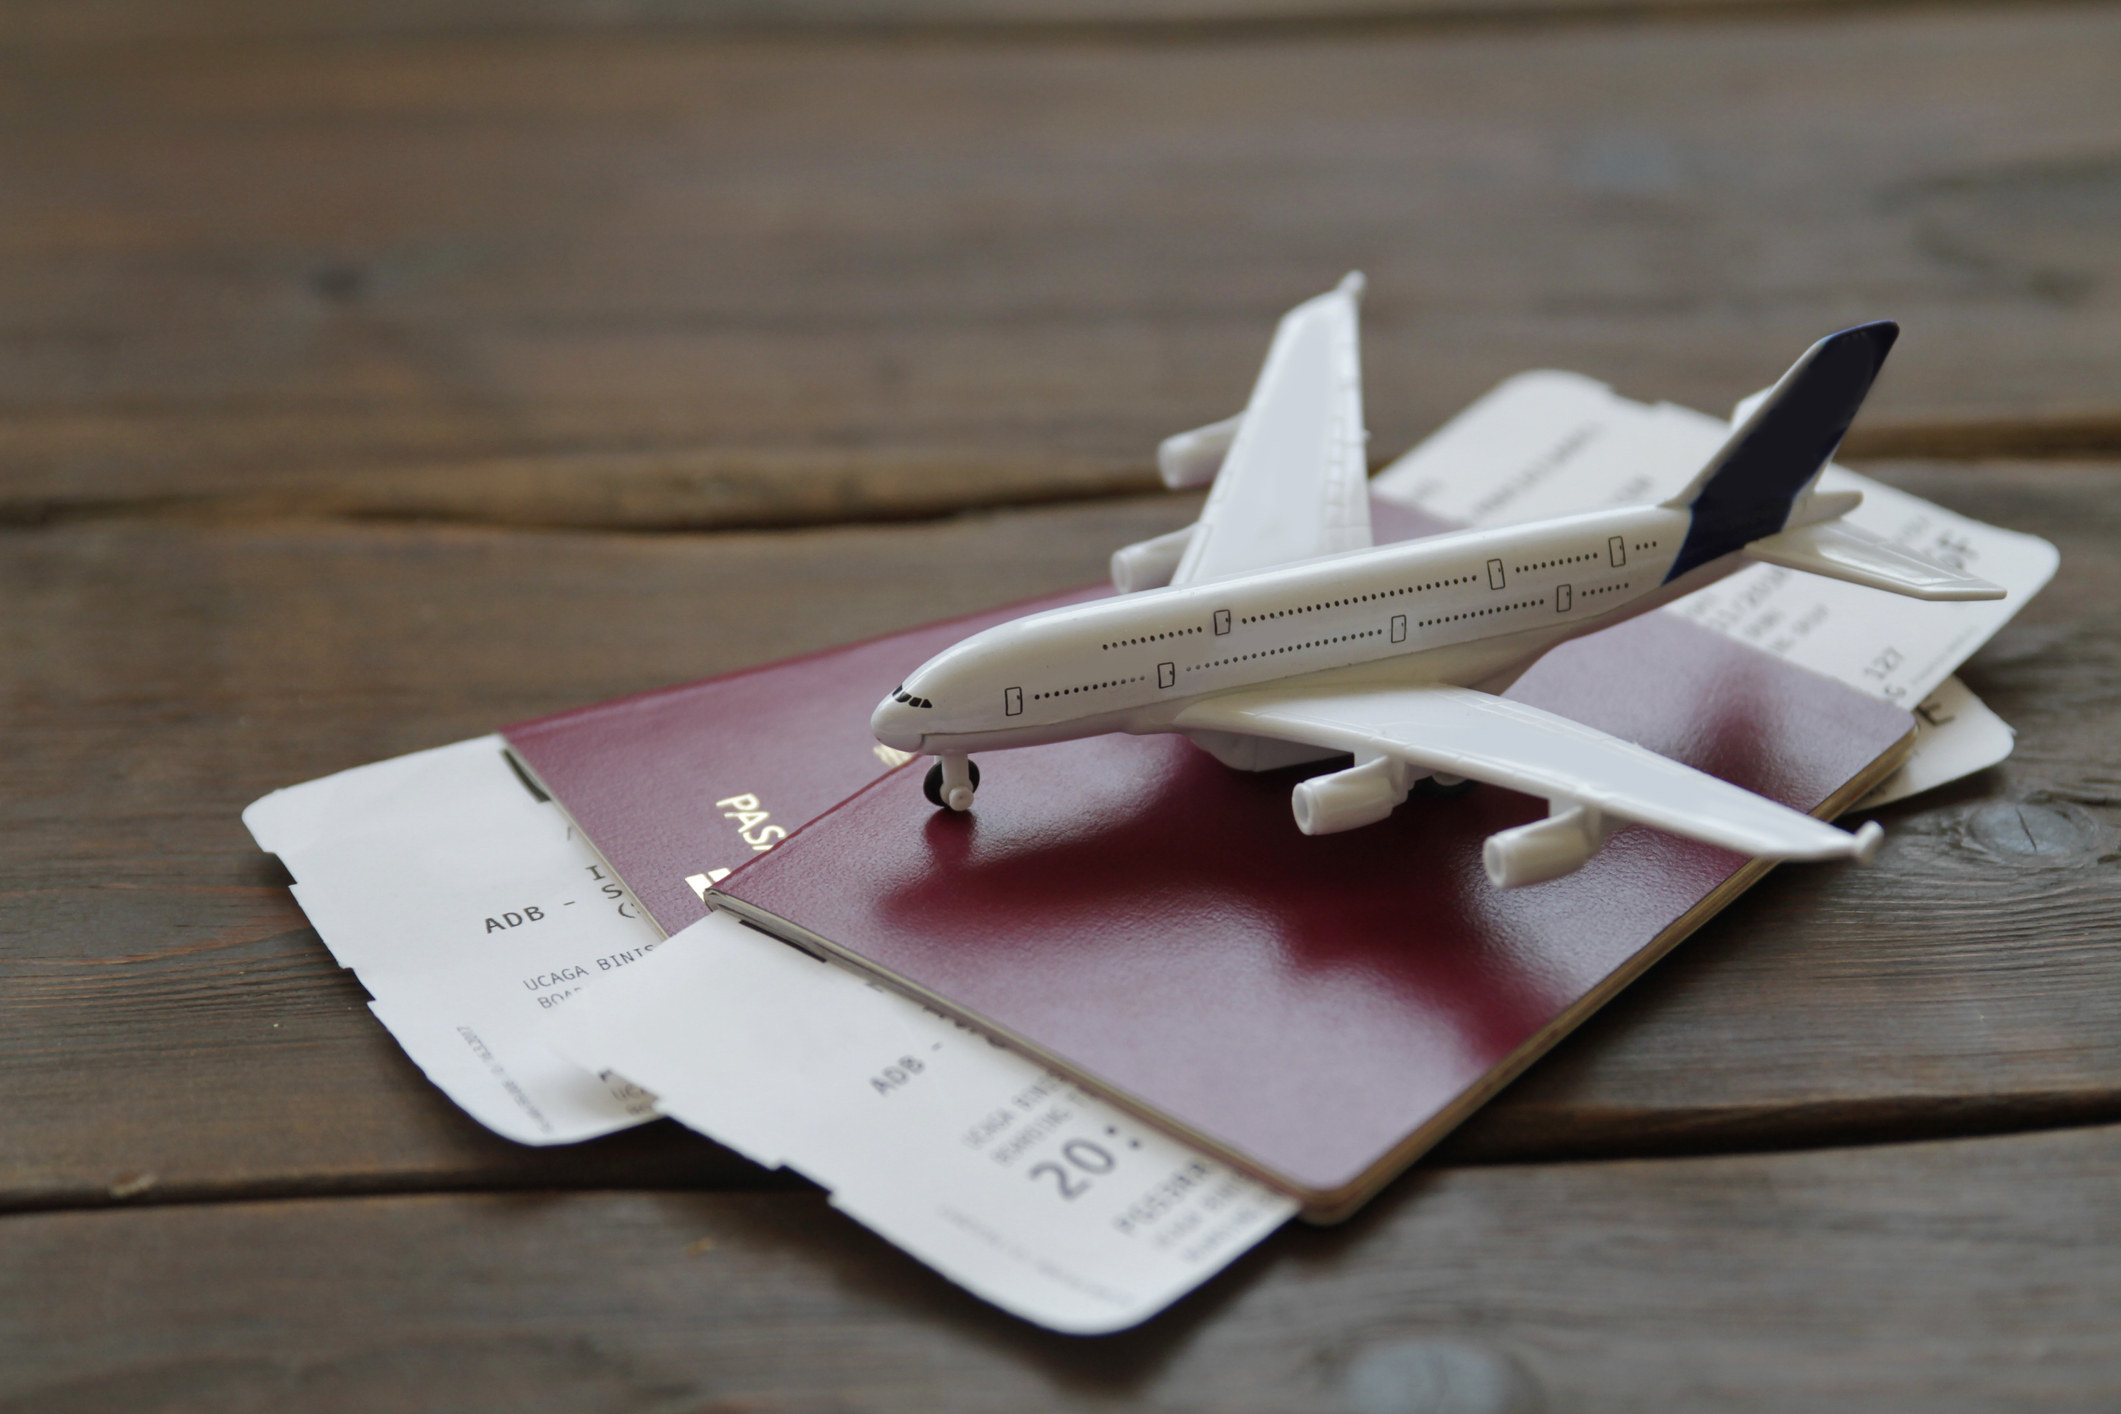 A toy airplane set atop passports and boarding passes.